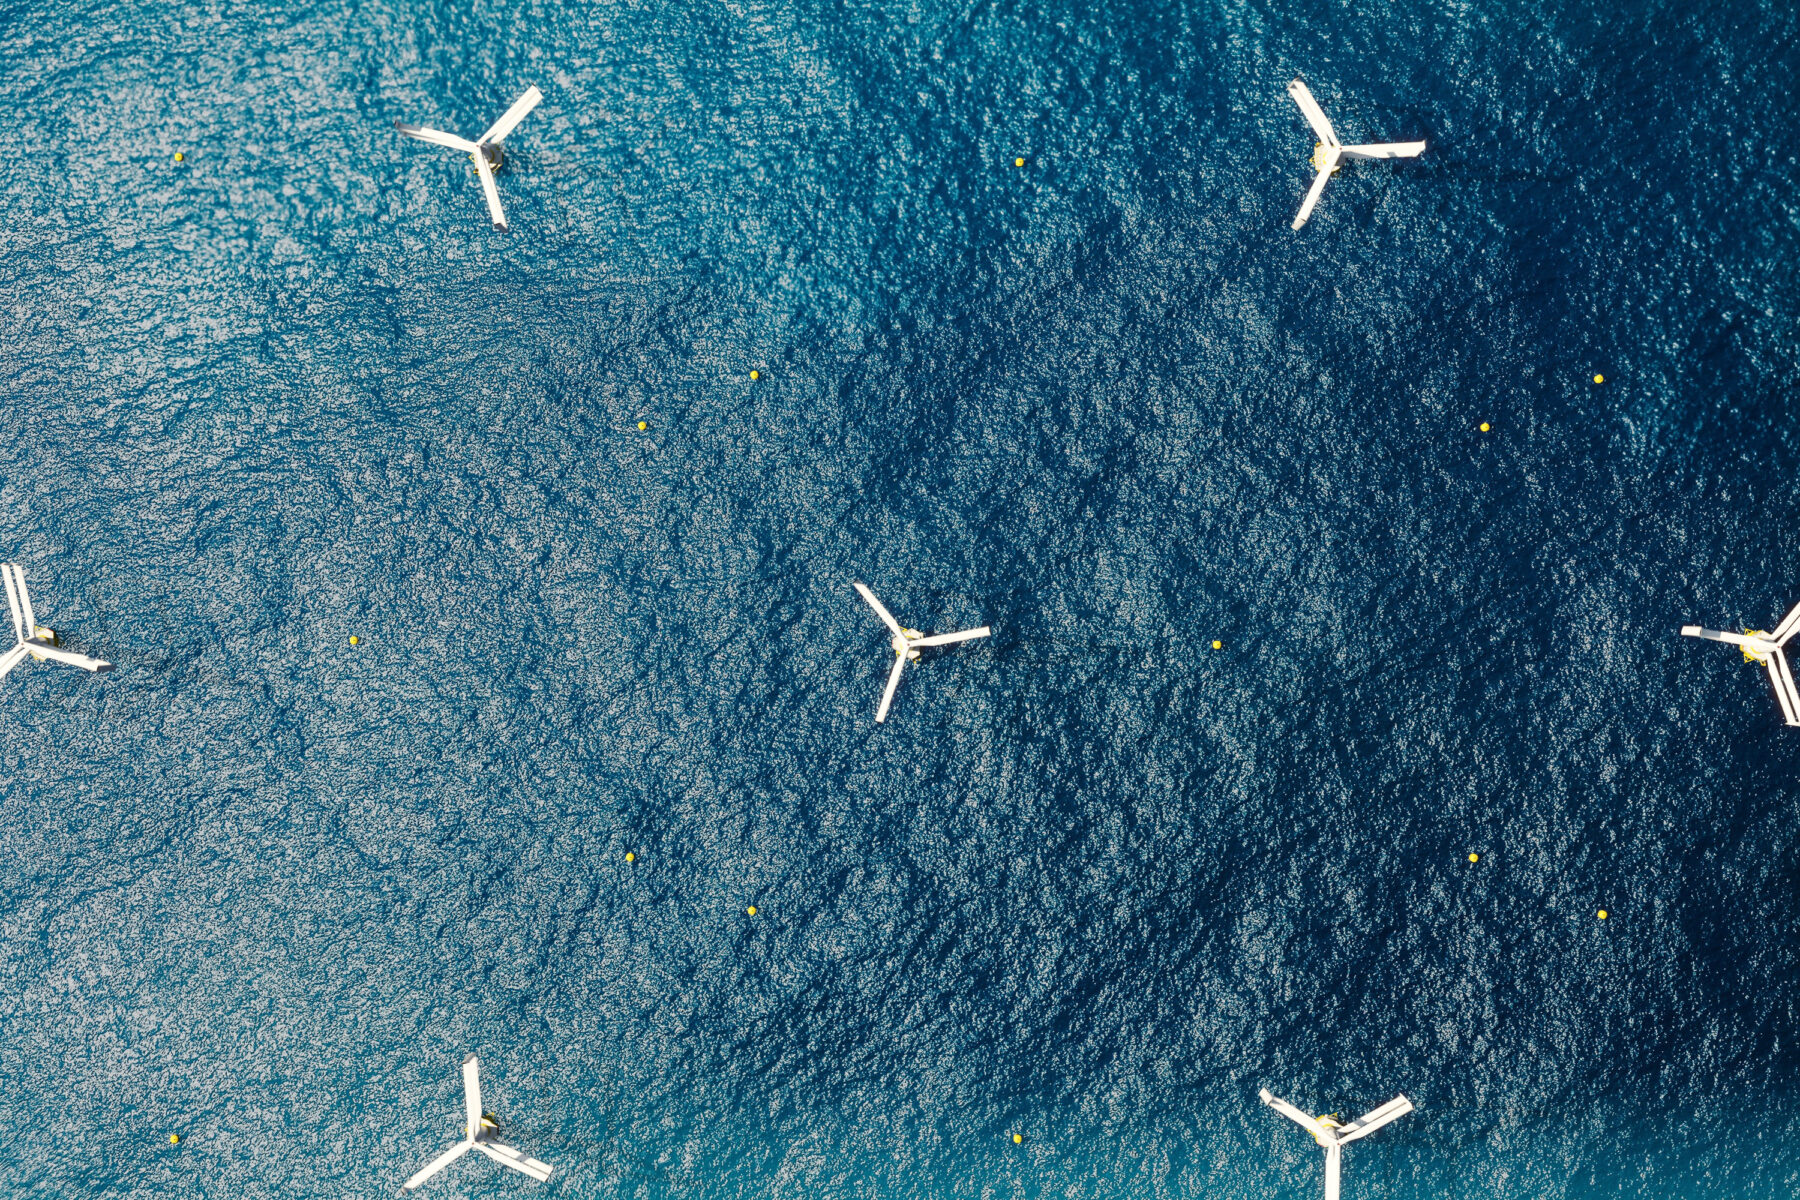 SeaTwirl S2 Windfarm from above